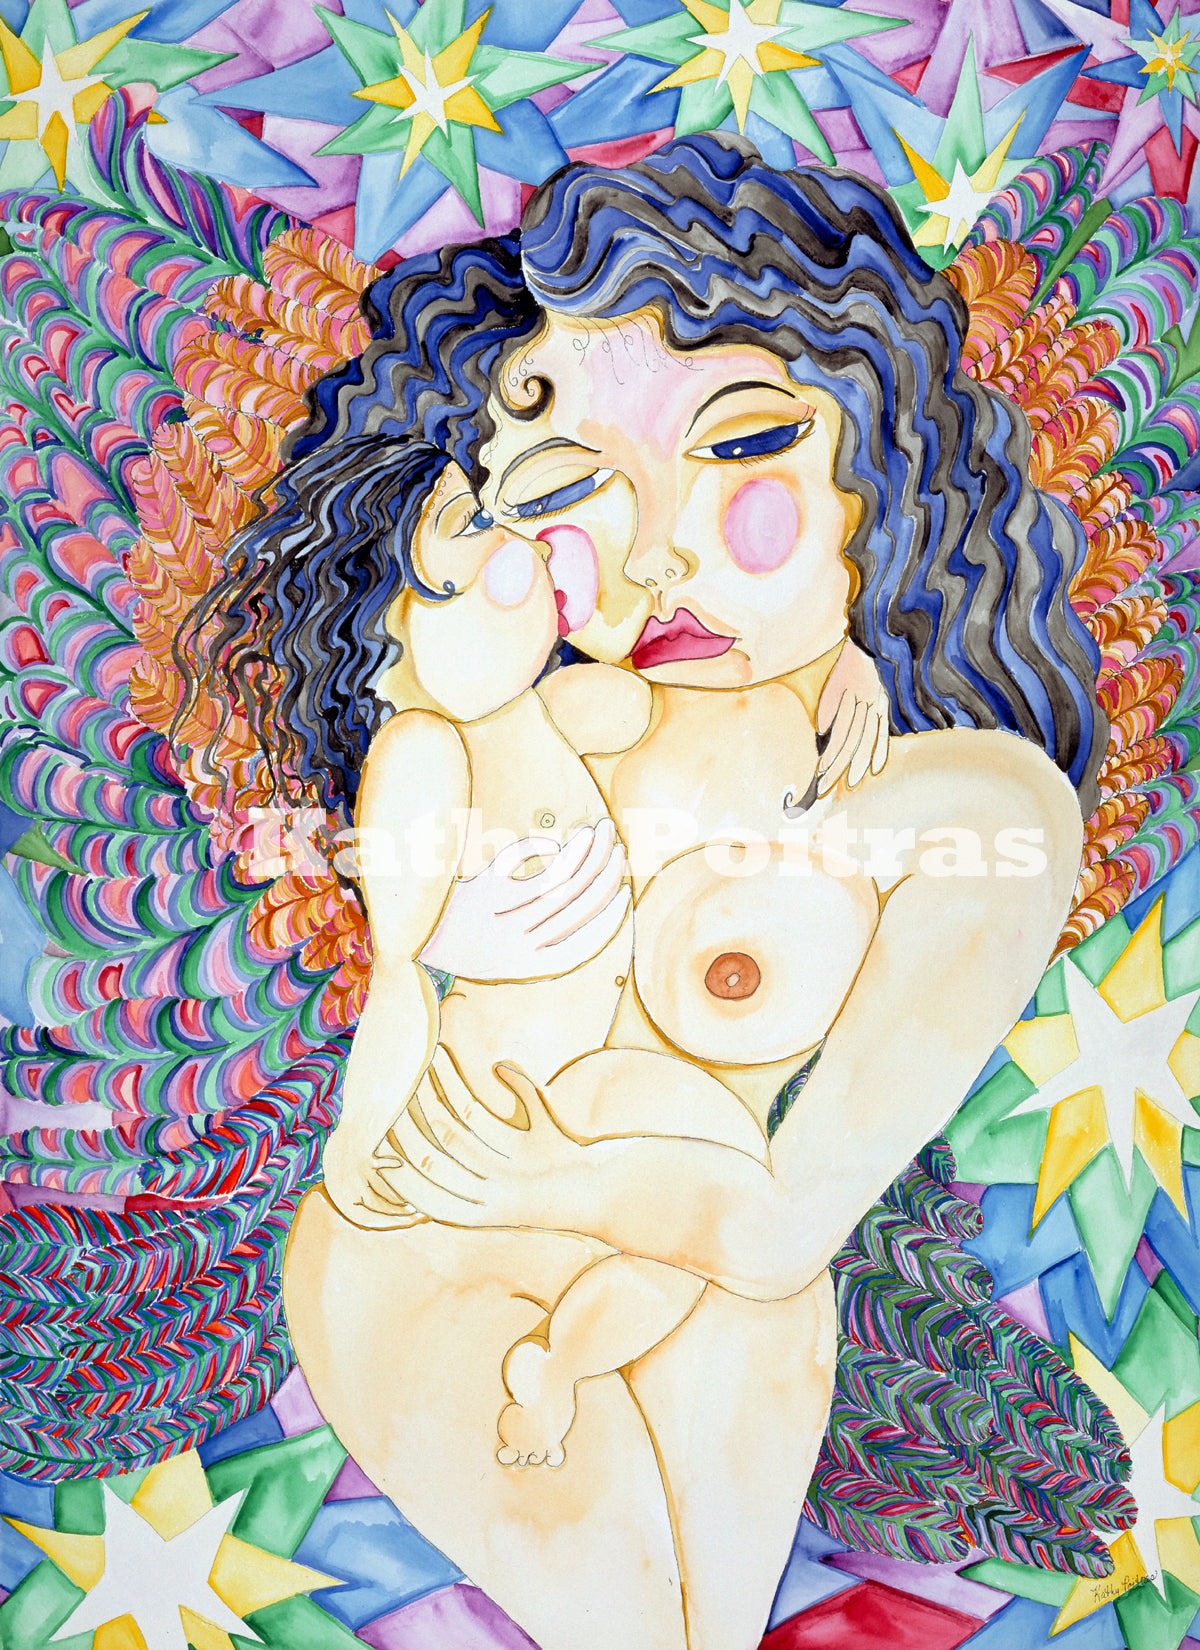 Warrior Mother. Watercolor and ink painting on paper by Kathy Poitras